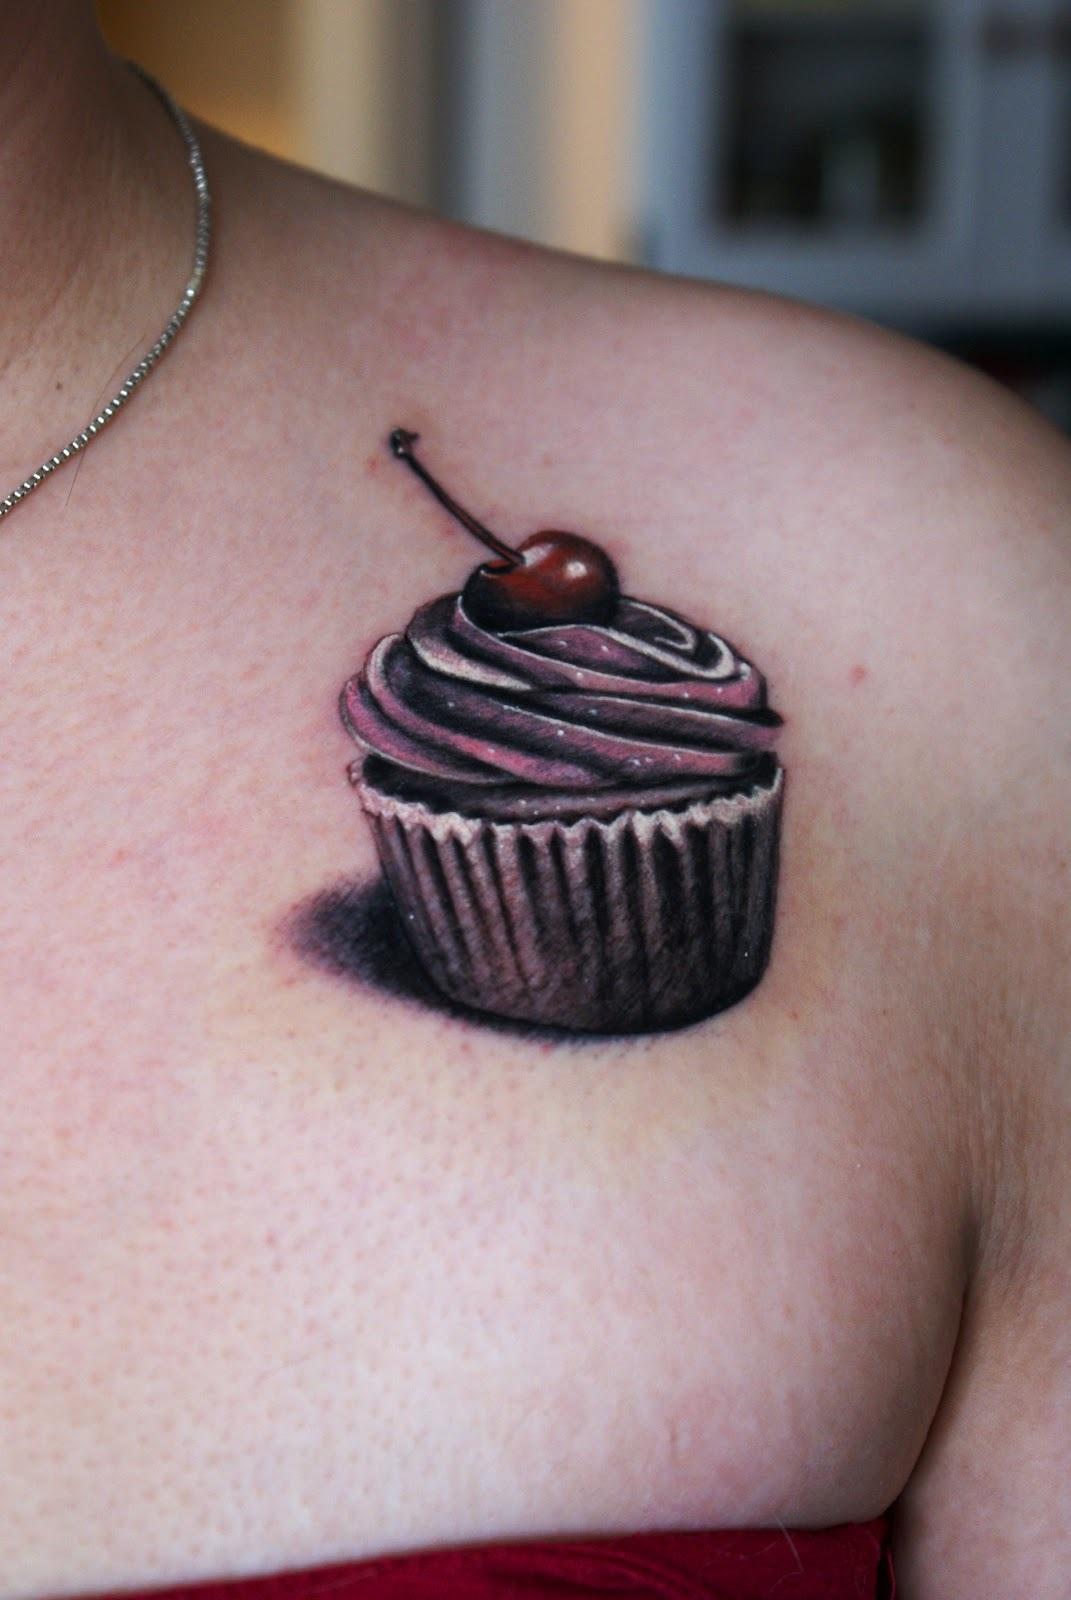 Cupcake Tattoos Designs Ideas and Meaning Tattoos For You